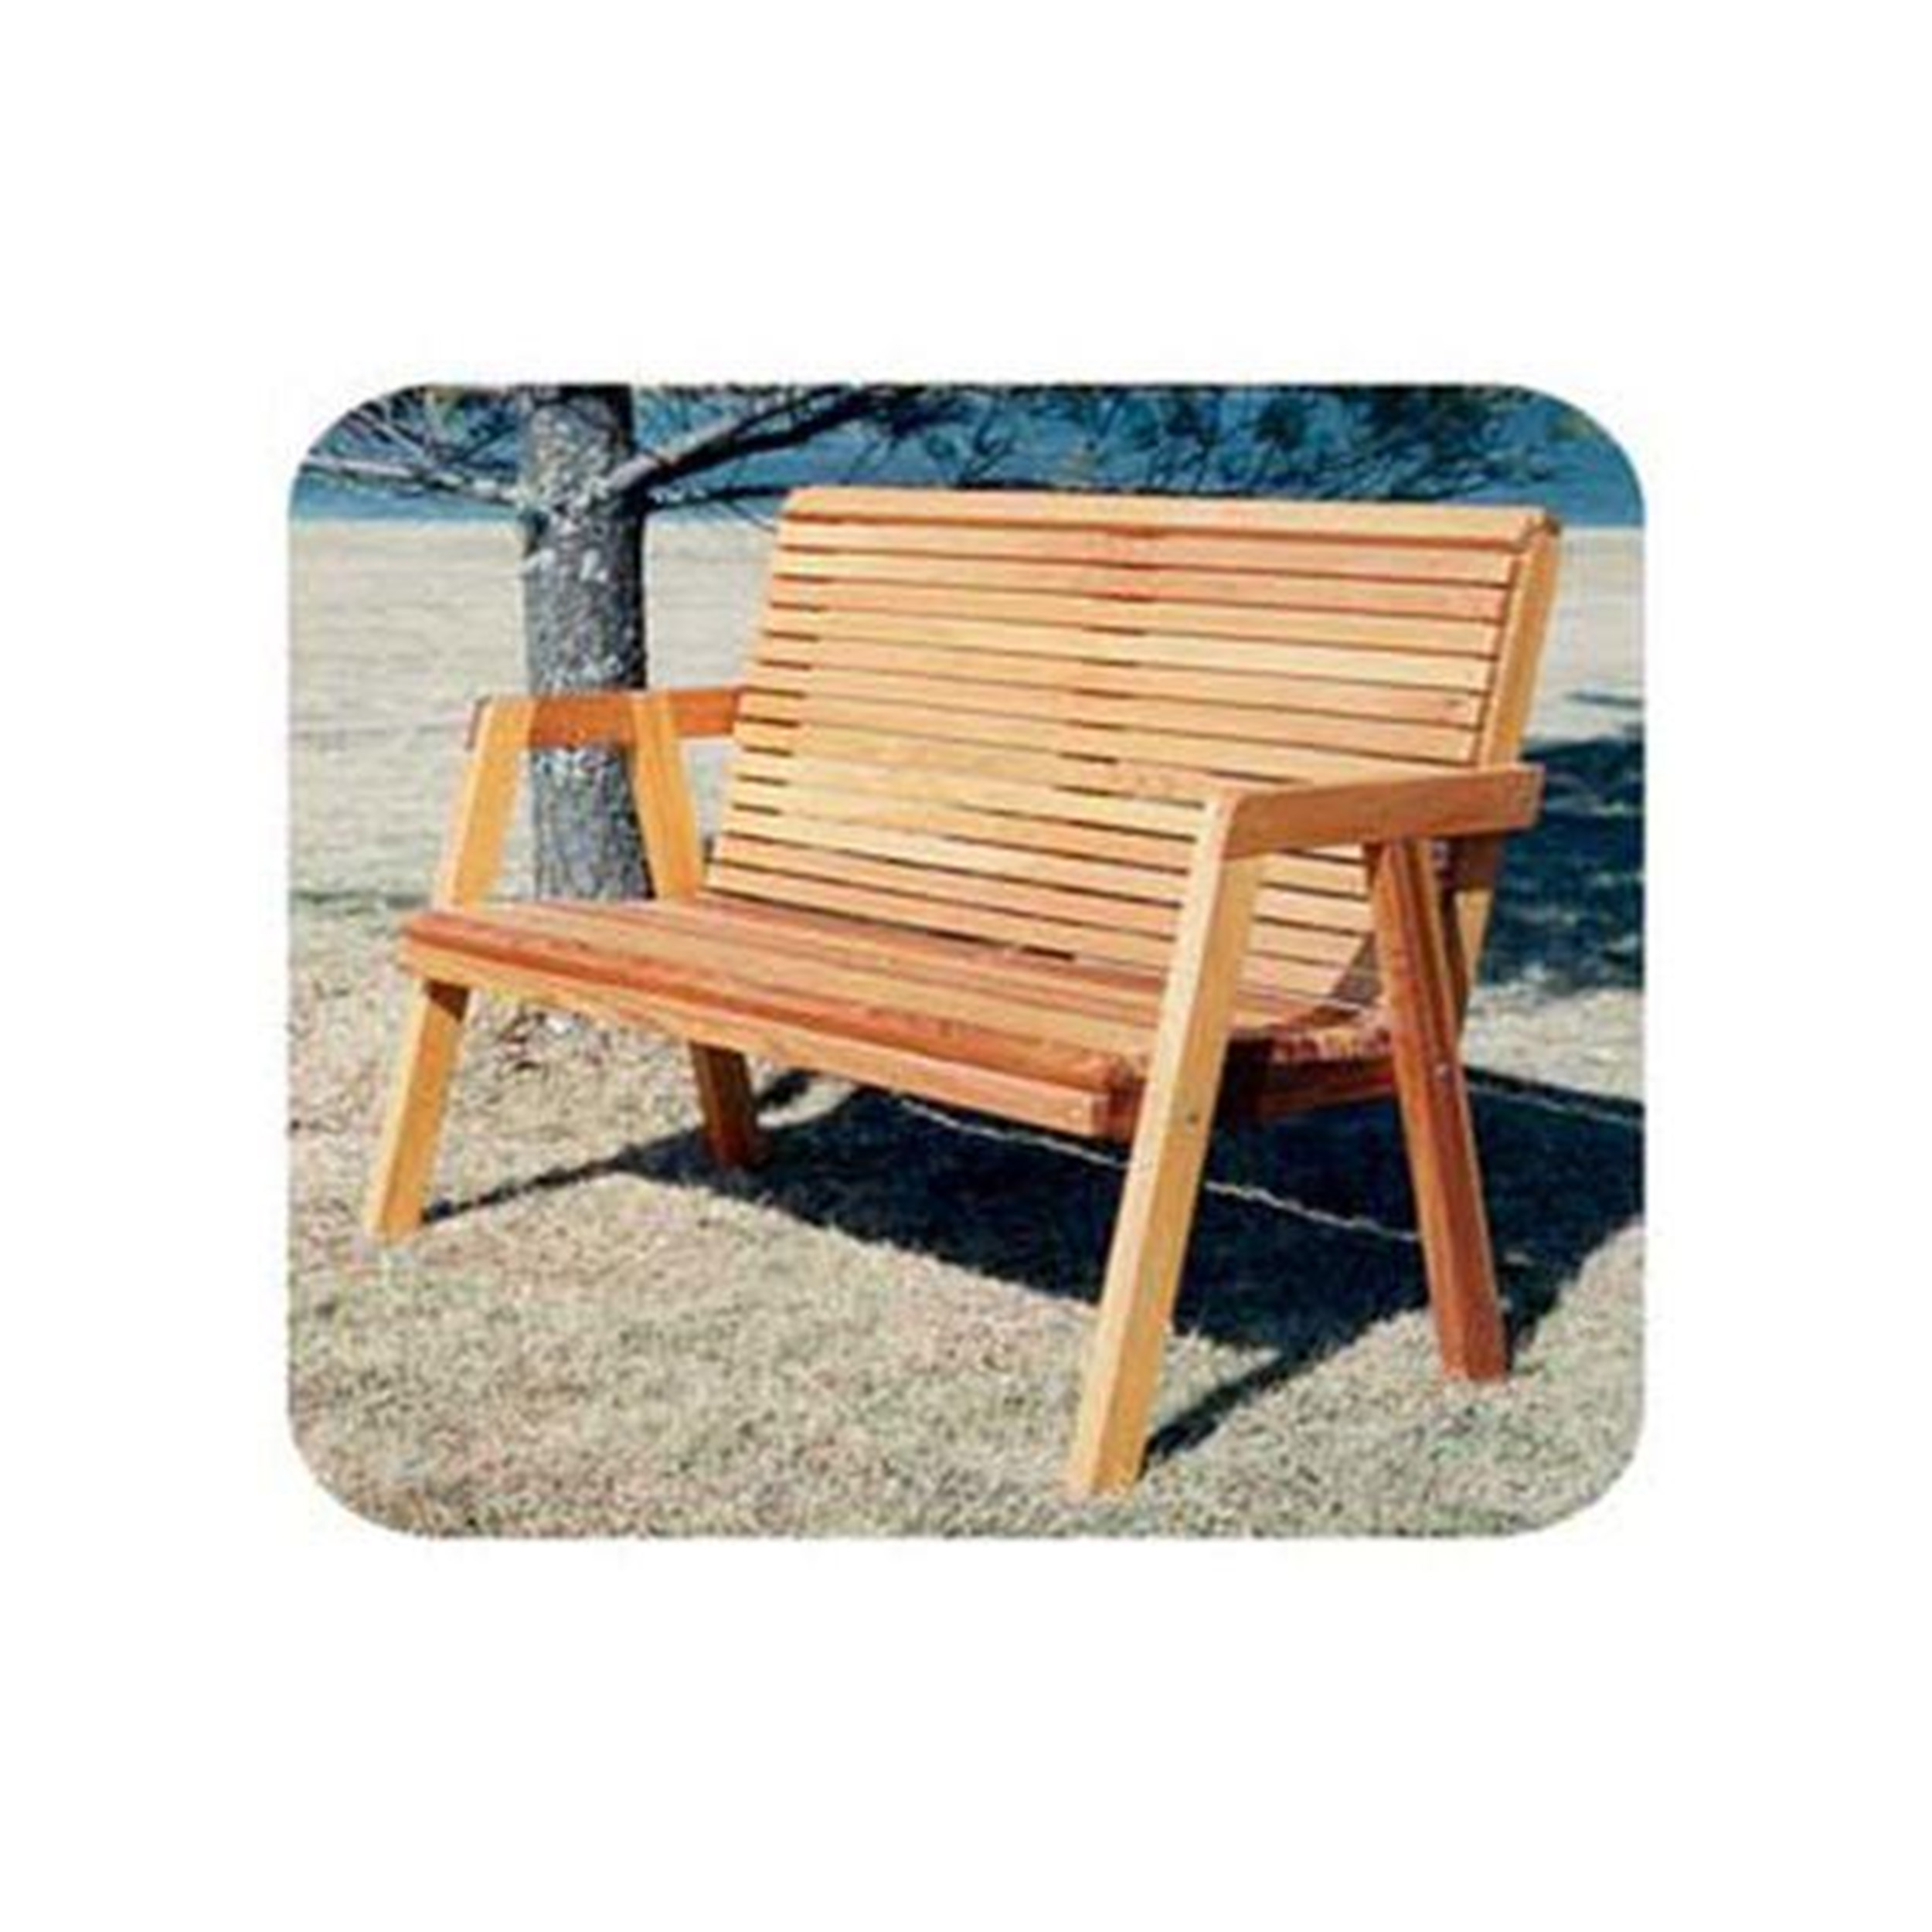 Woodworking Project Paper Plan To Build Simple Patio Bench